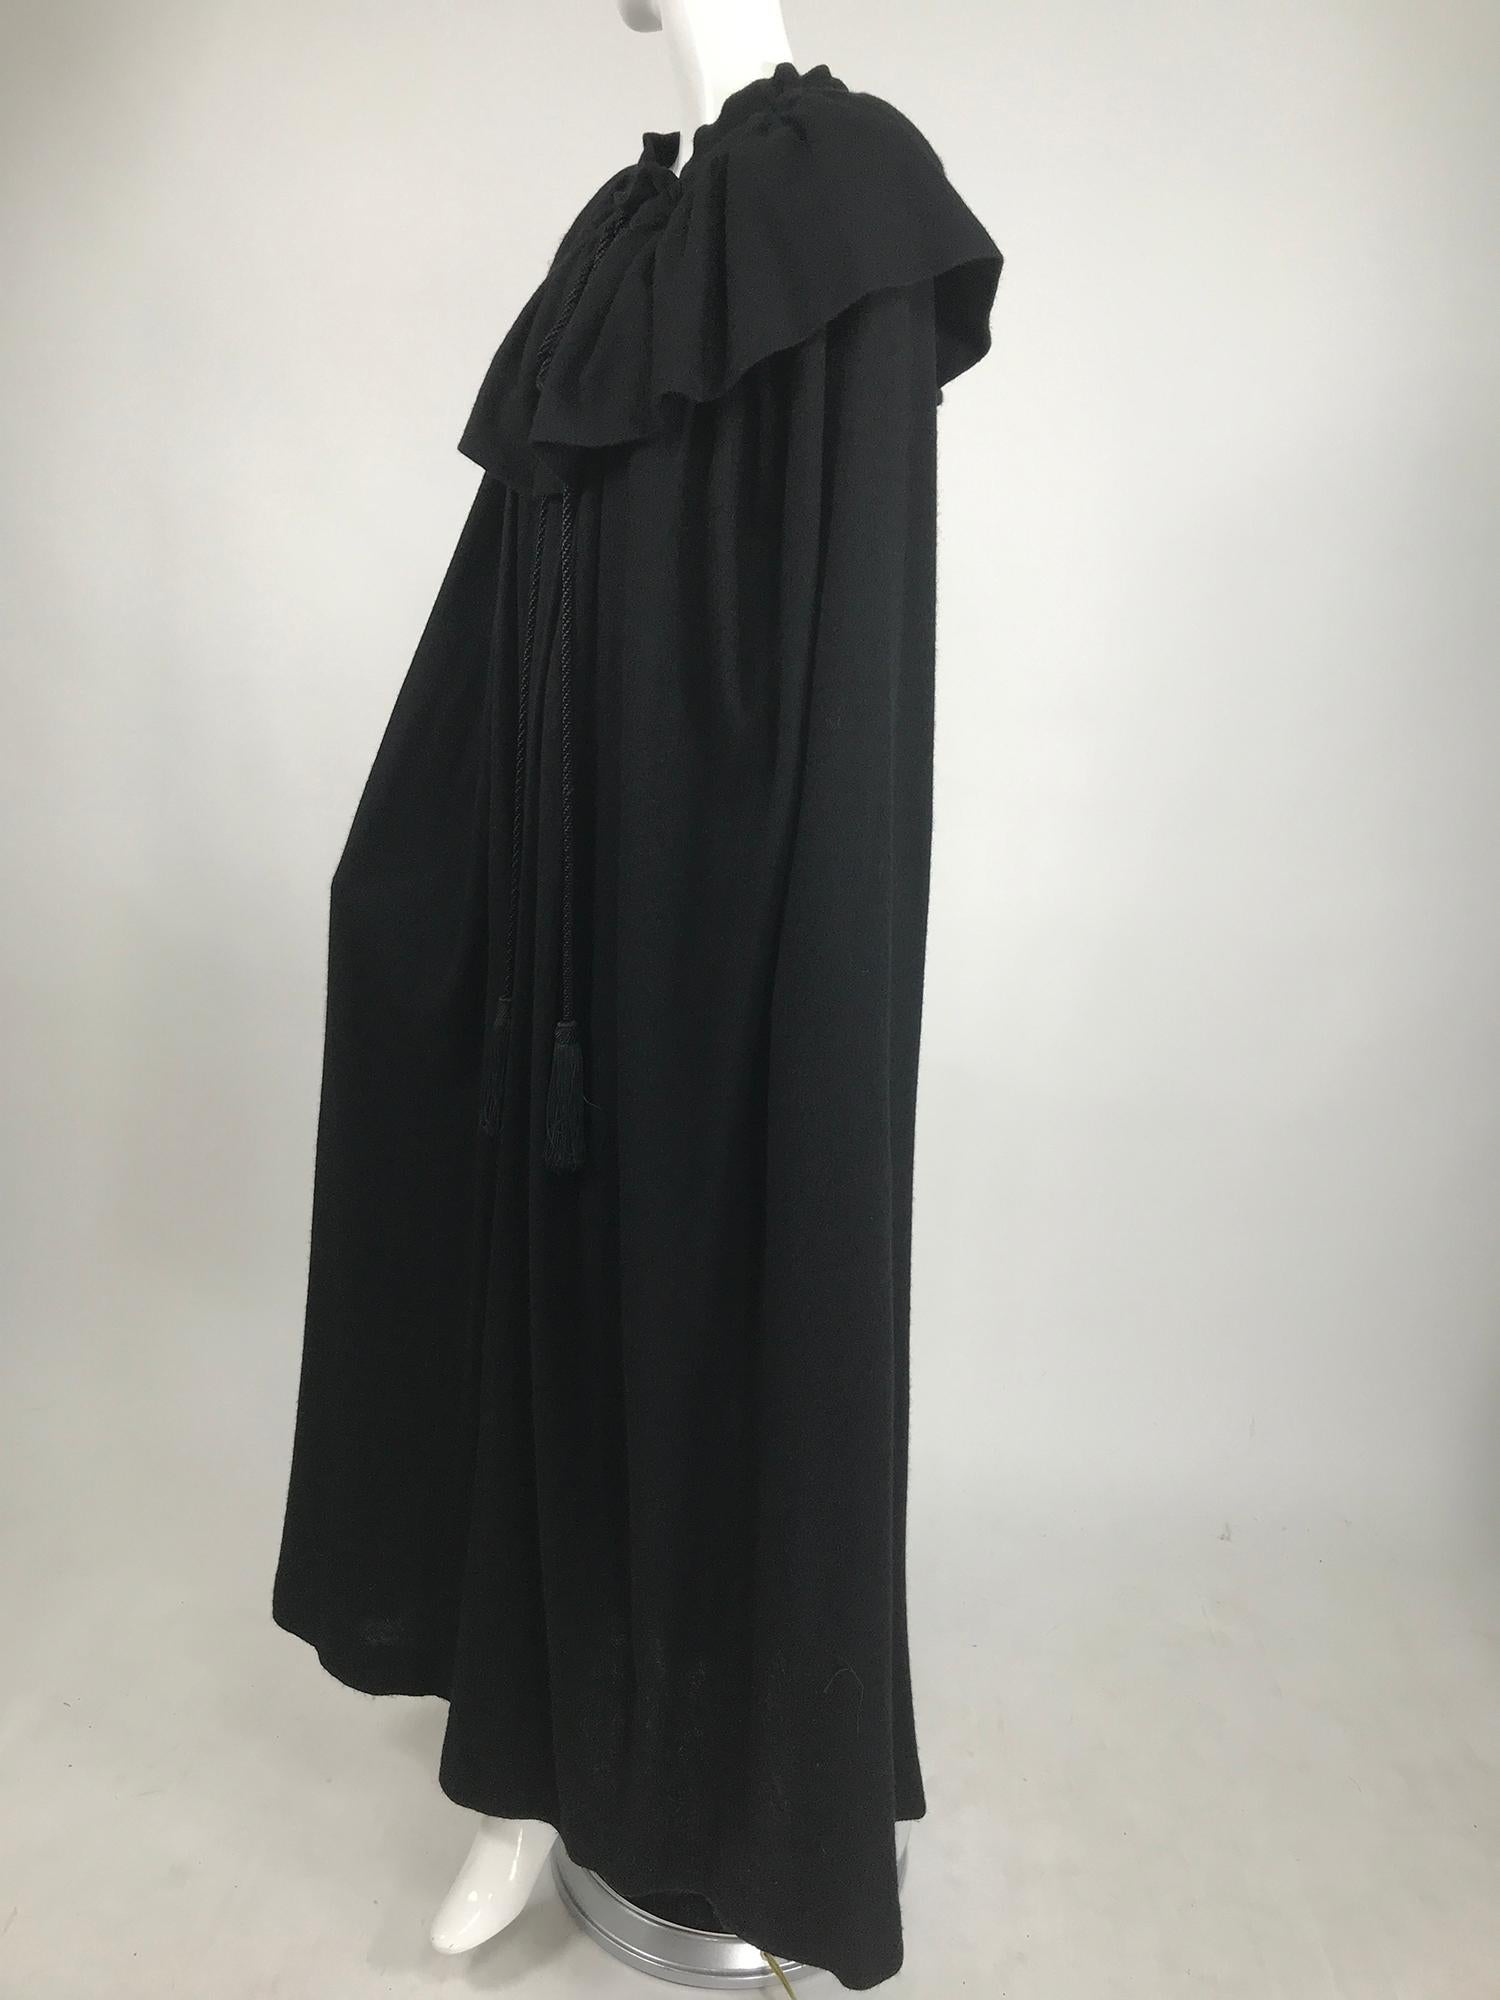 Vintage Yves Saint Laurent Black Wool Cape 1970s In Good Condition For Sale In West Palm Beach, FL